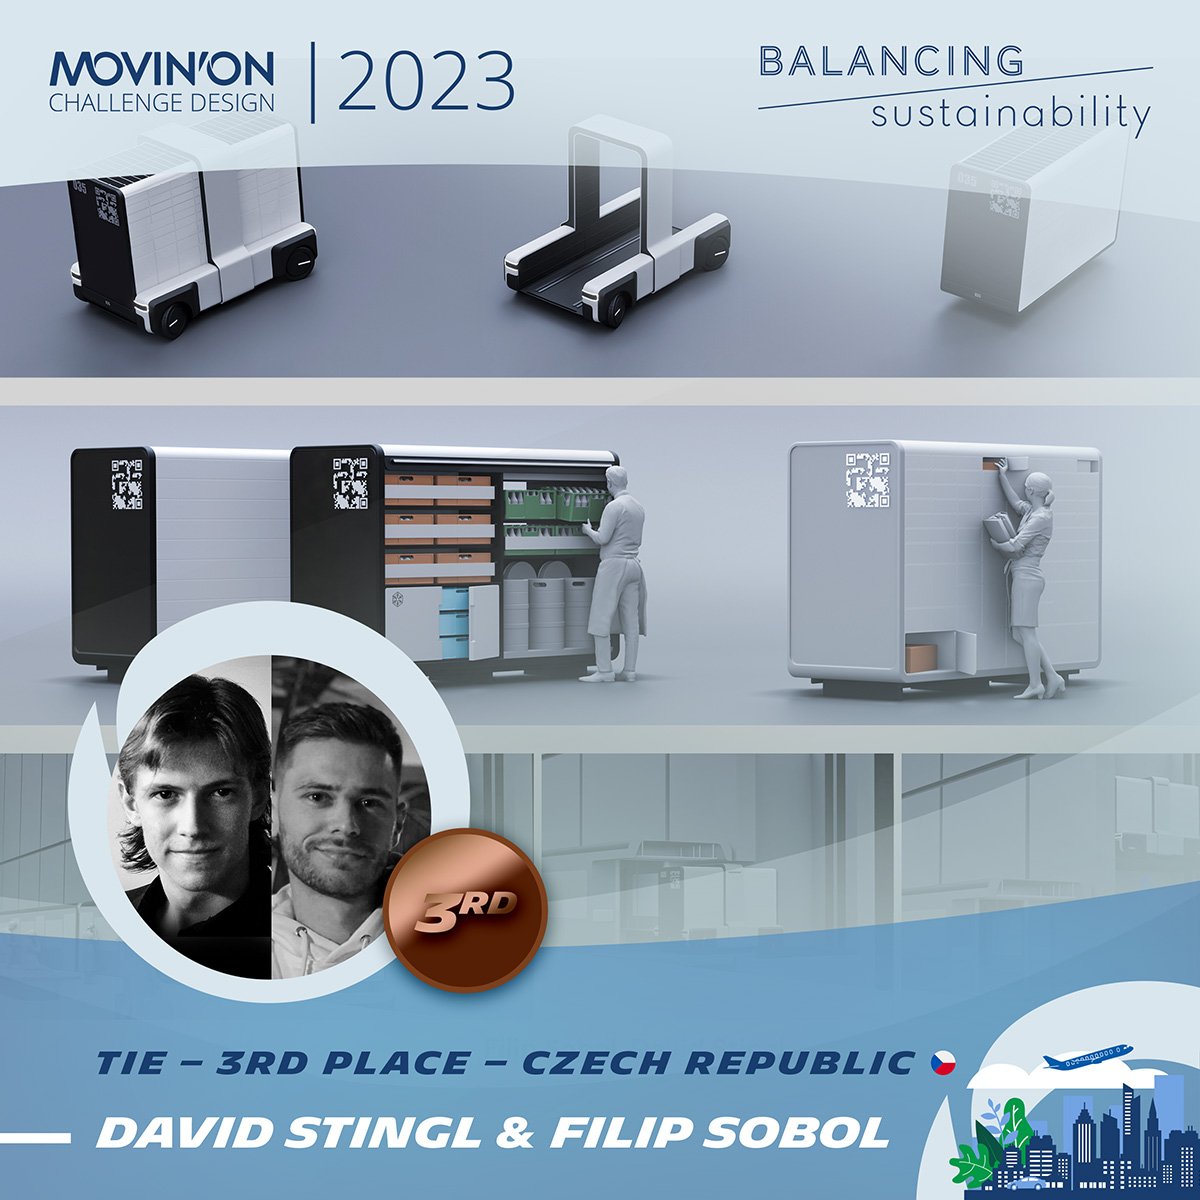 The huge success of UMPRUM students Filip Sobel and David Stingl in the international competition Michelin Movin'On 2023